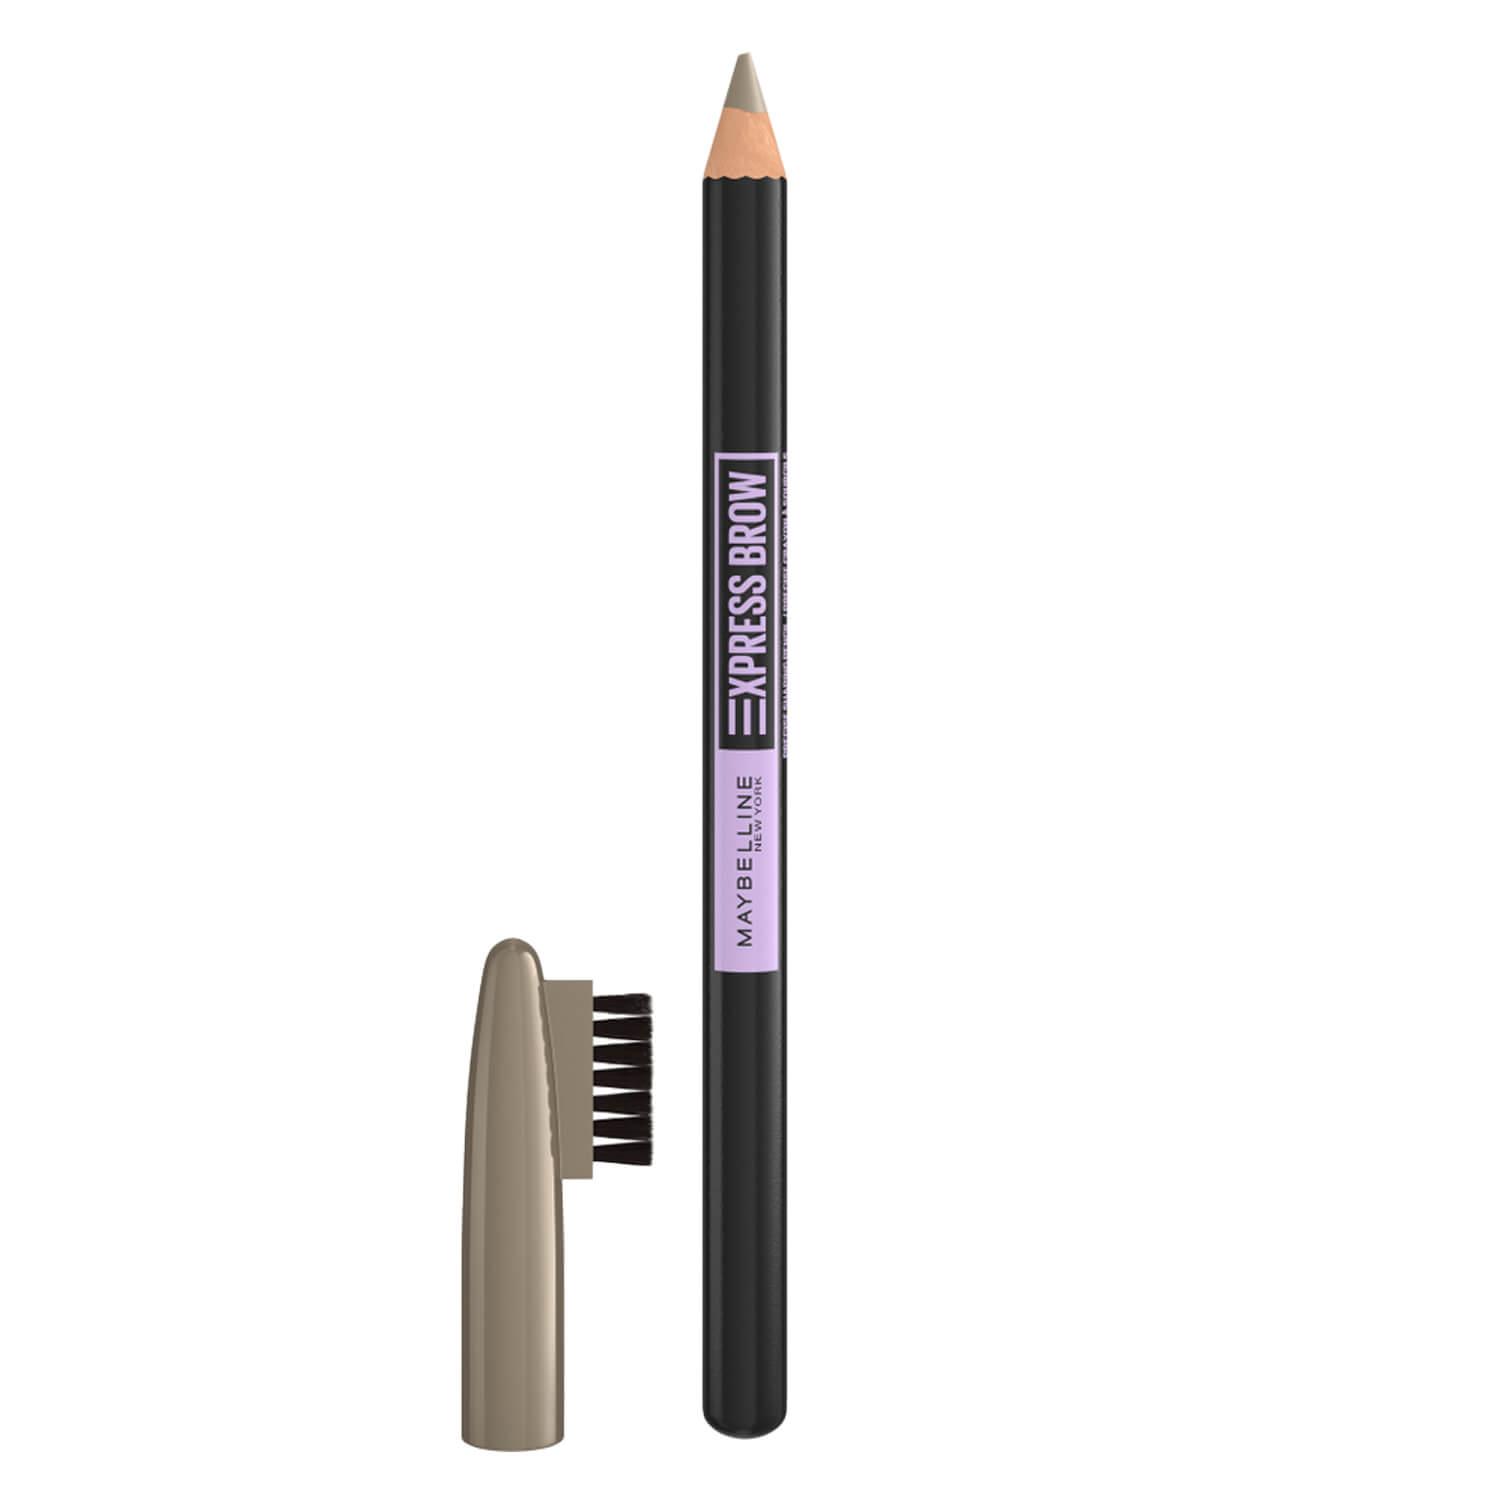 Maybelline NY Brows - Express Brow Precise Shaping 02 Blonde